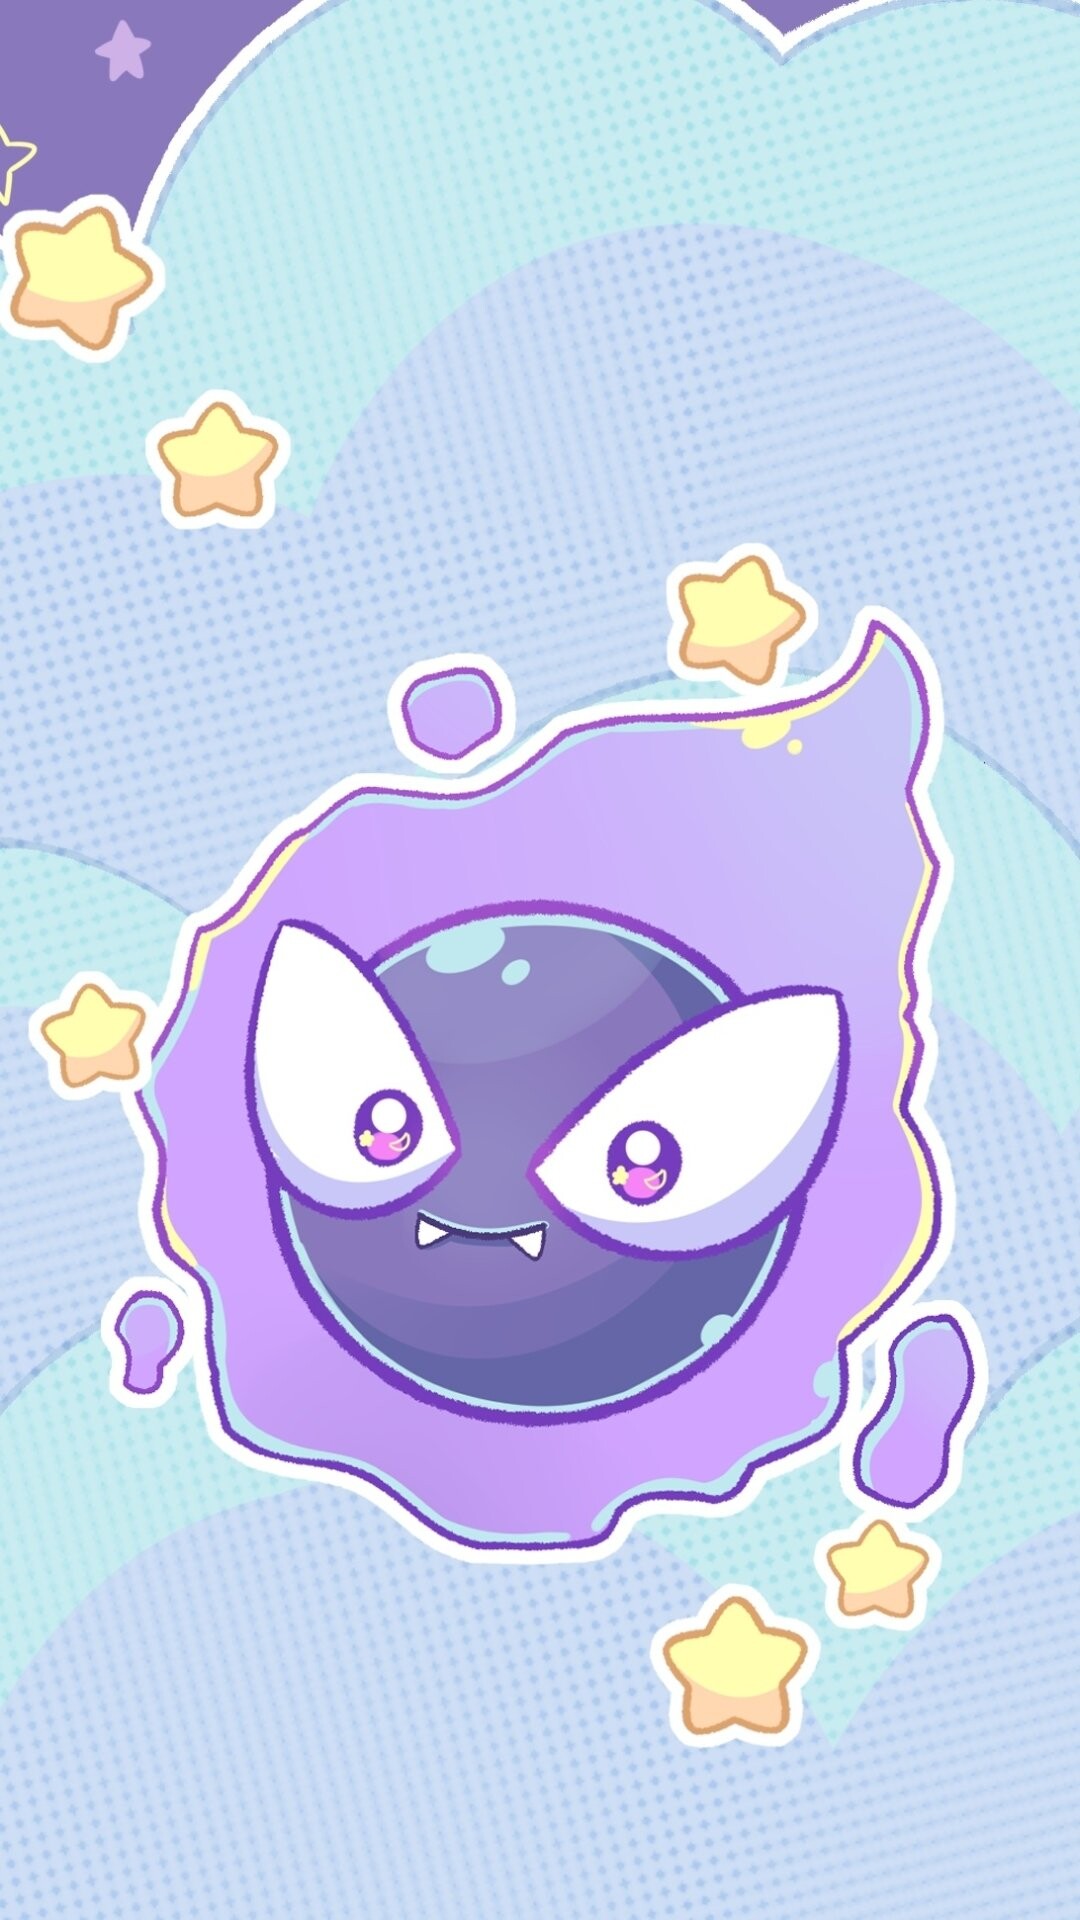 Gastly: Anime, Almost invisible Pokemon that cloaks the target and puts it to sleep without notice. 1080x1920 Full HD Background.